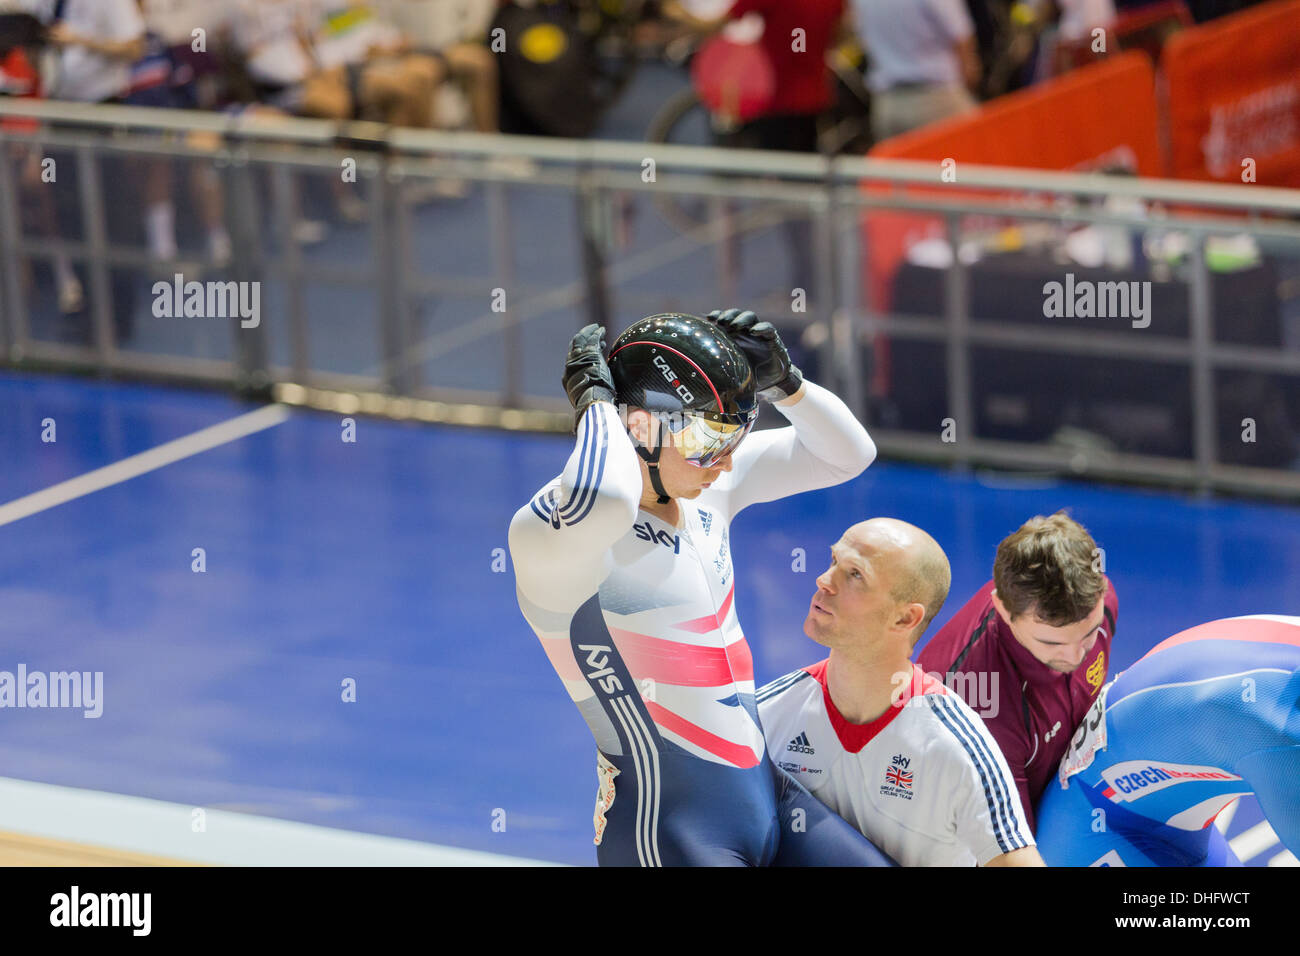 Matthew Crampton (GBR) and coach getting ready at start of the Mens Sprint Quarter final line up against  Adam Ptacnik (CZE). Stock Photo